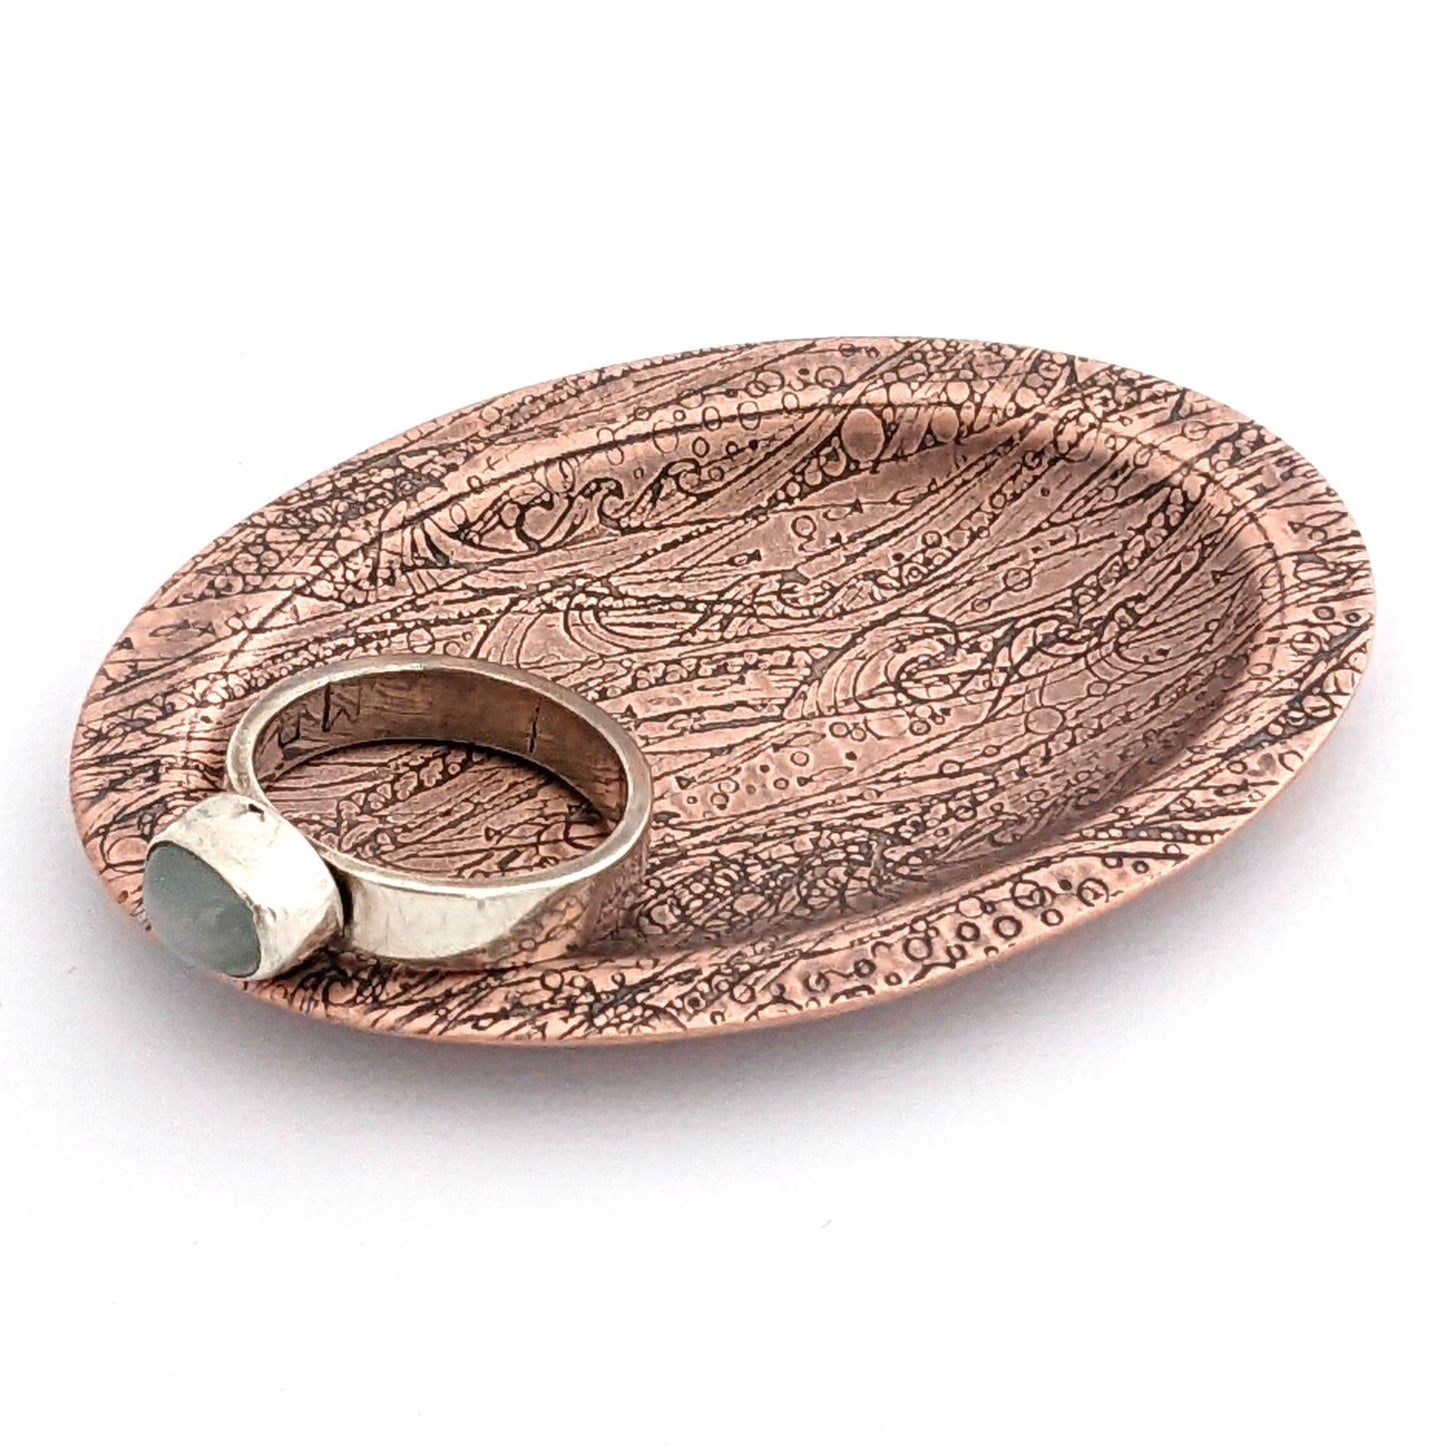 Copper oval ring dish with design of waves in a stormy sea.  Dish is 2 inches by three inches with a raised lip.